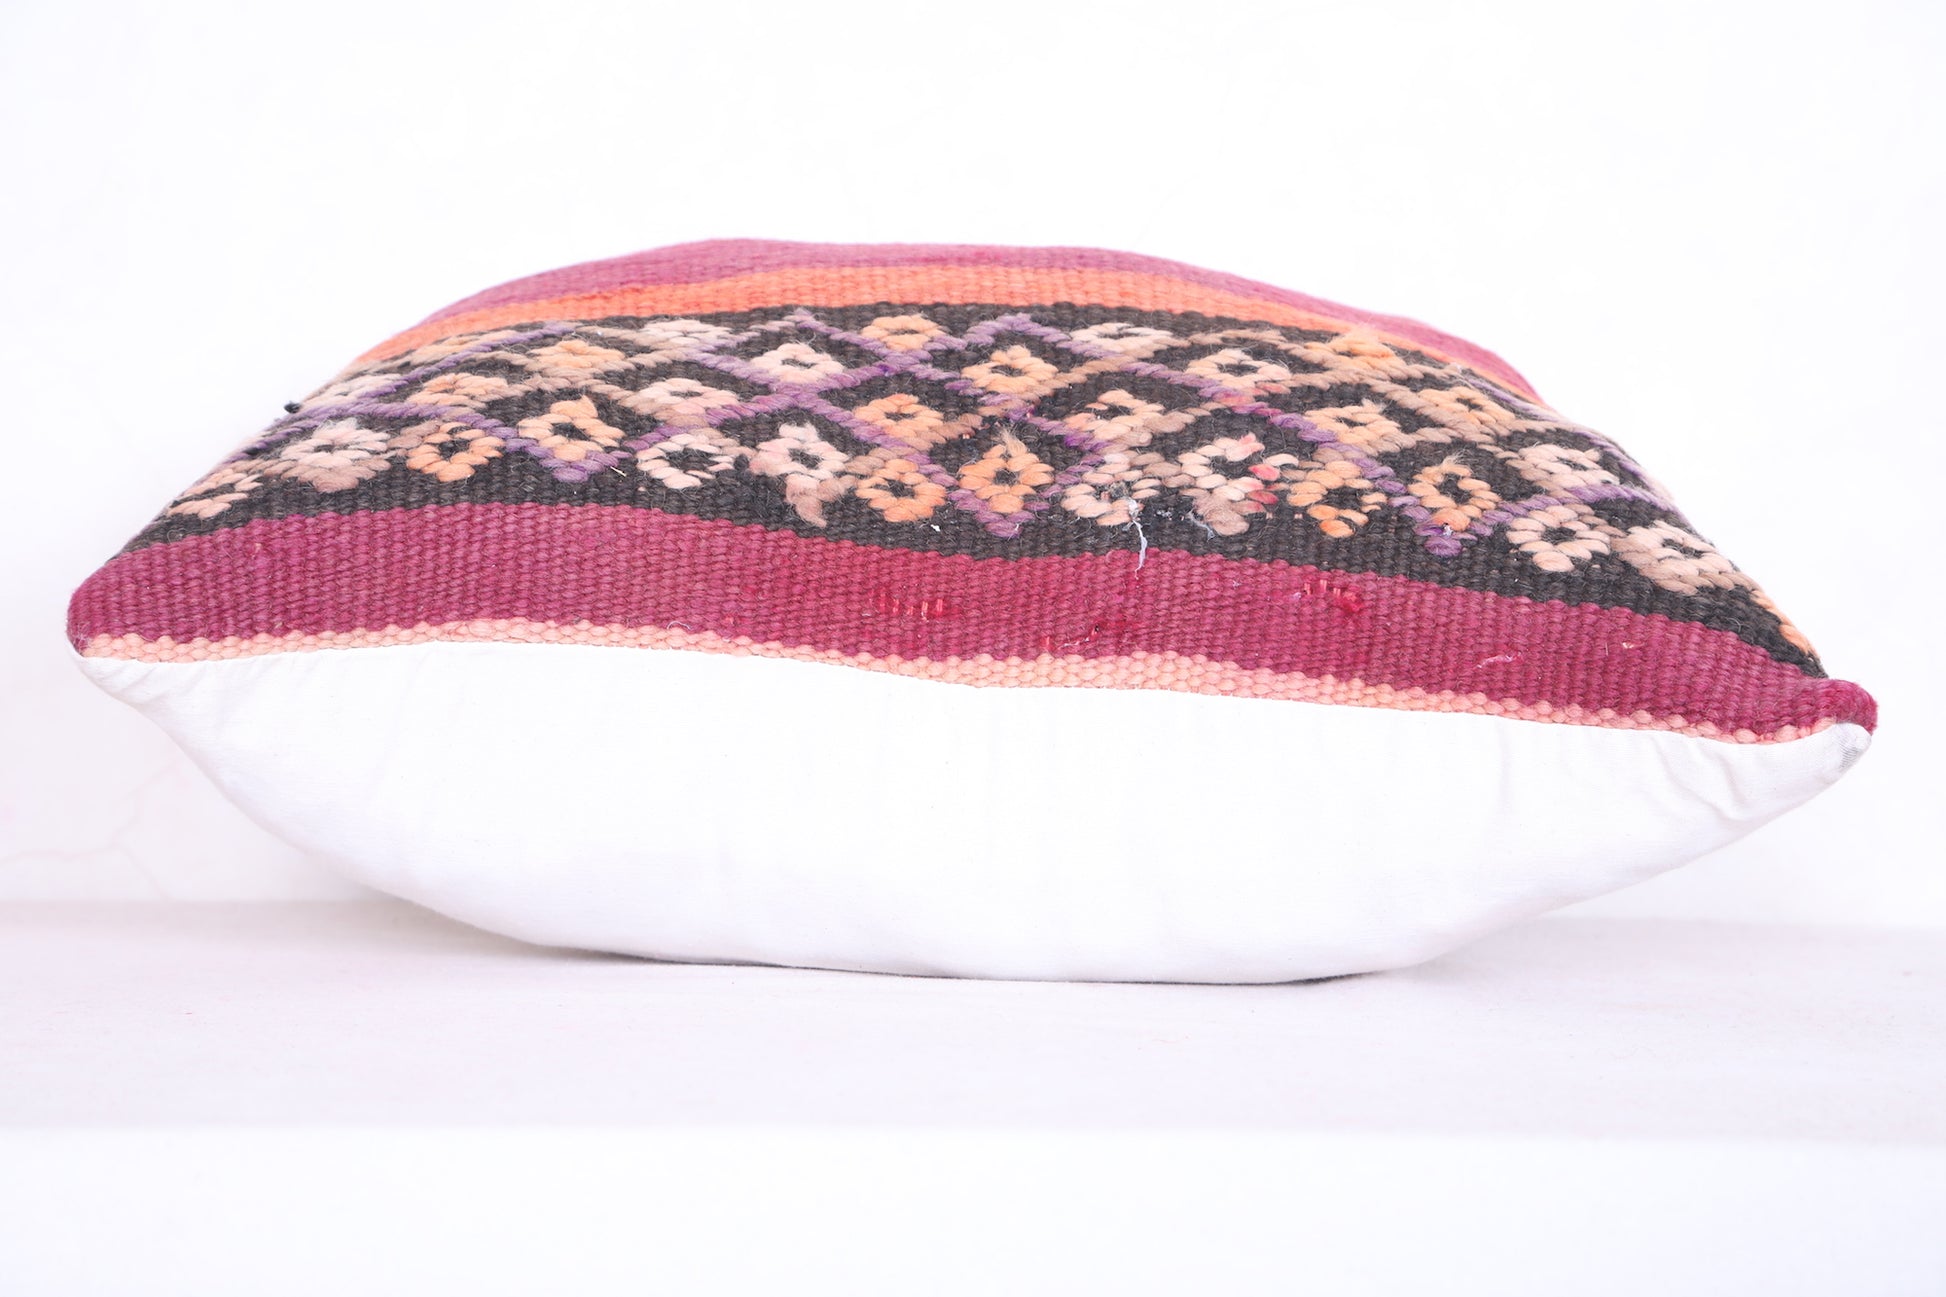 Moroccan handmade kilim pillow 16.9 INCHES X 22 INCHES